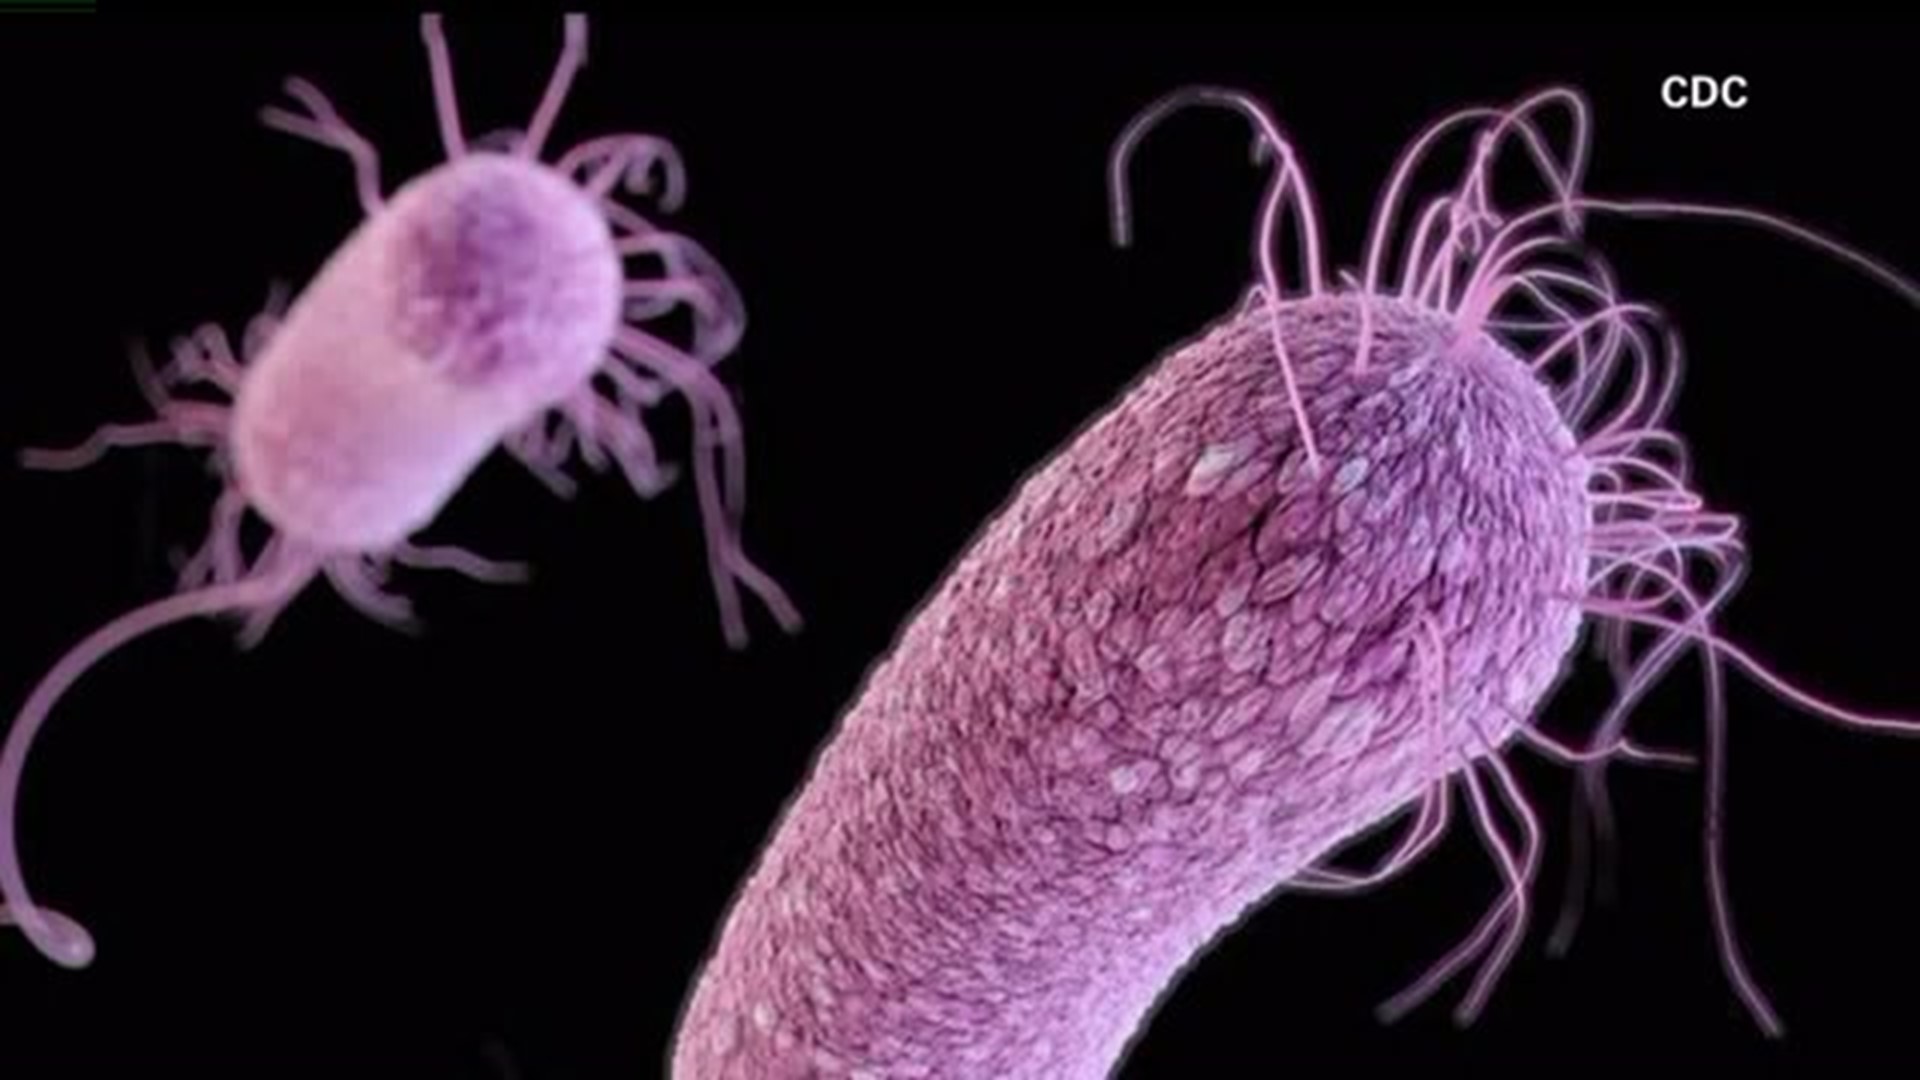 Officials not talking about superbug